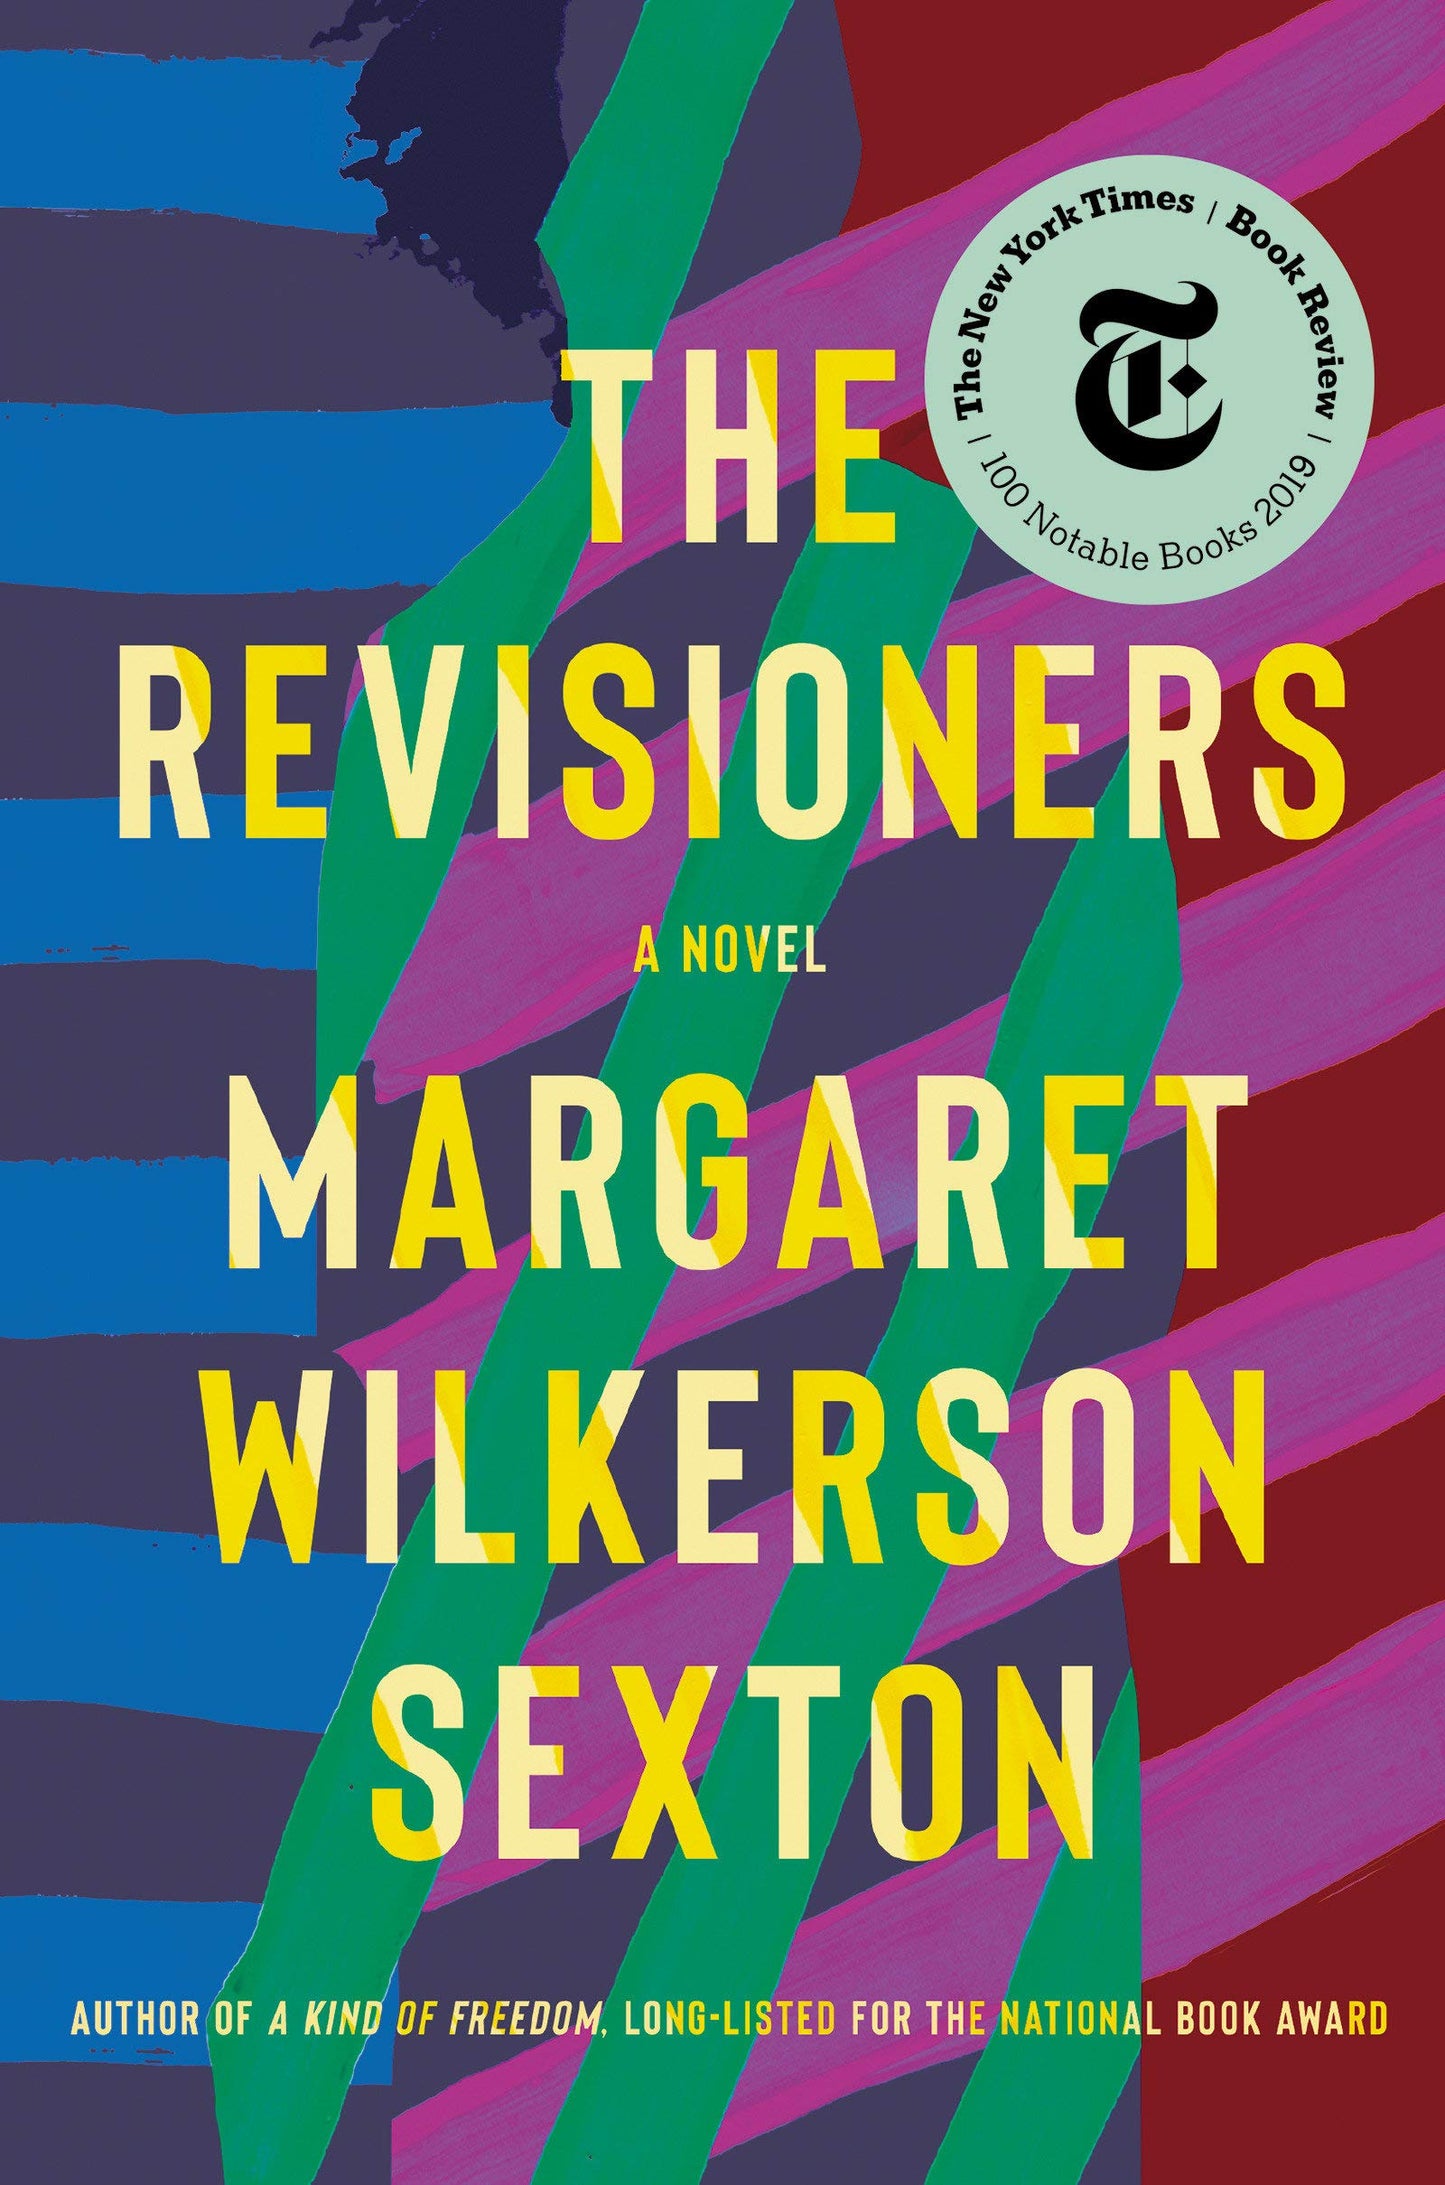 The Revisioners (Paperback)